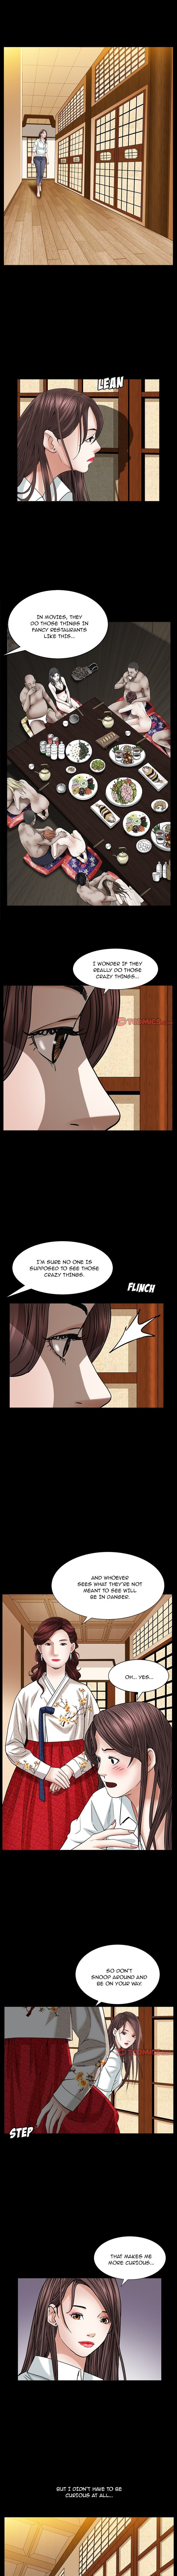 Snare - Chapter 12 Page 4